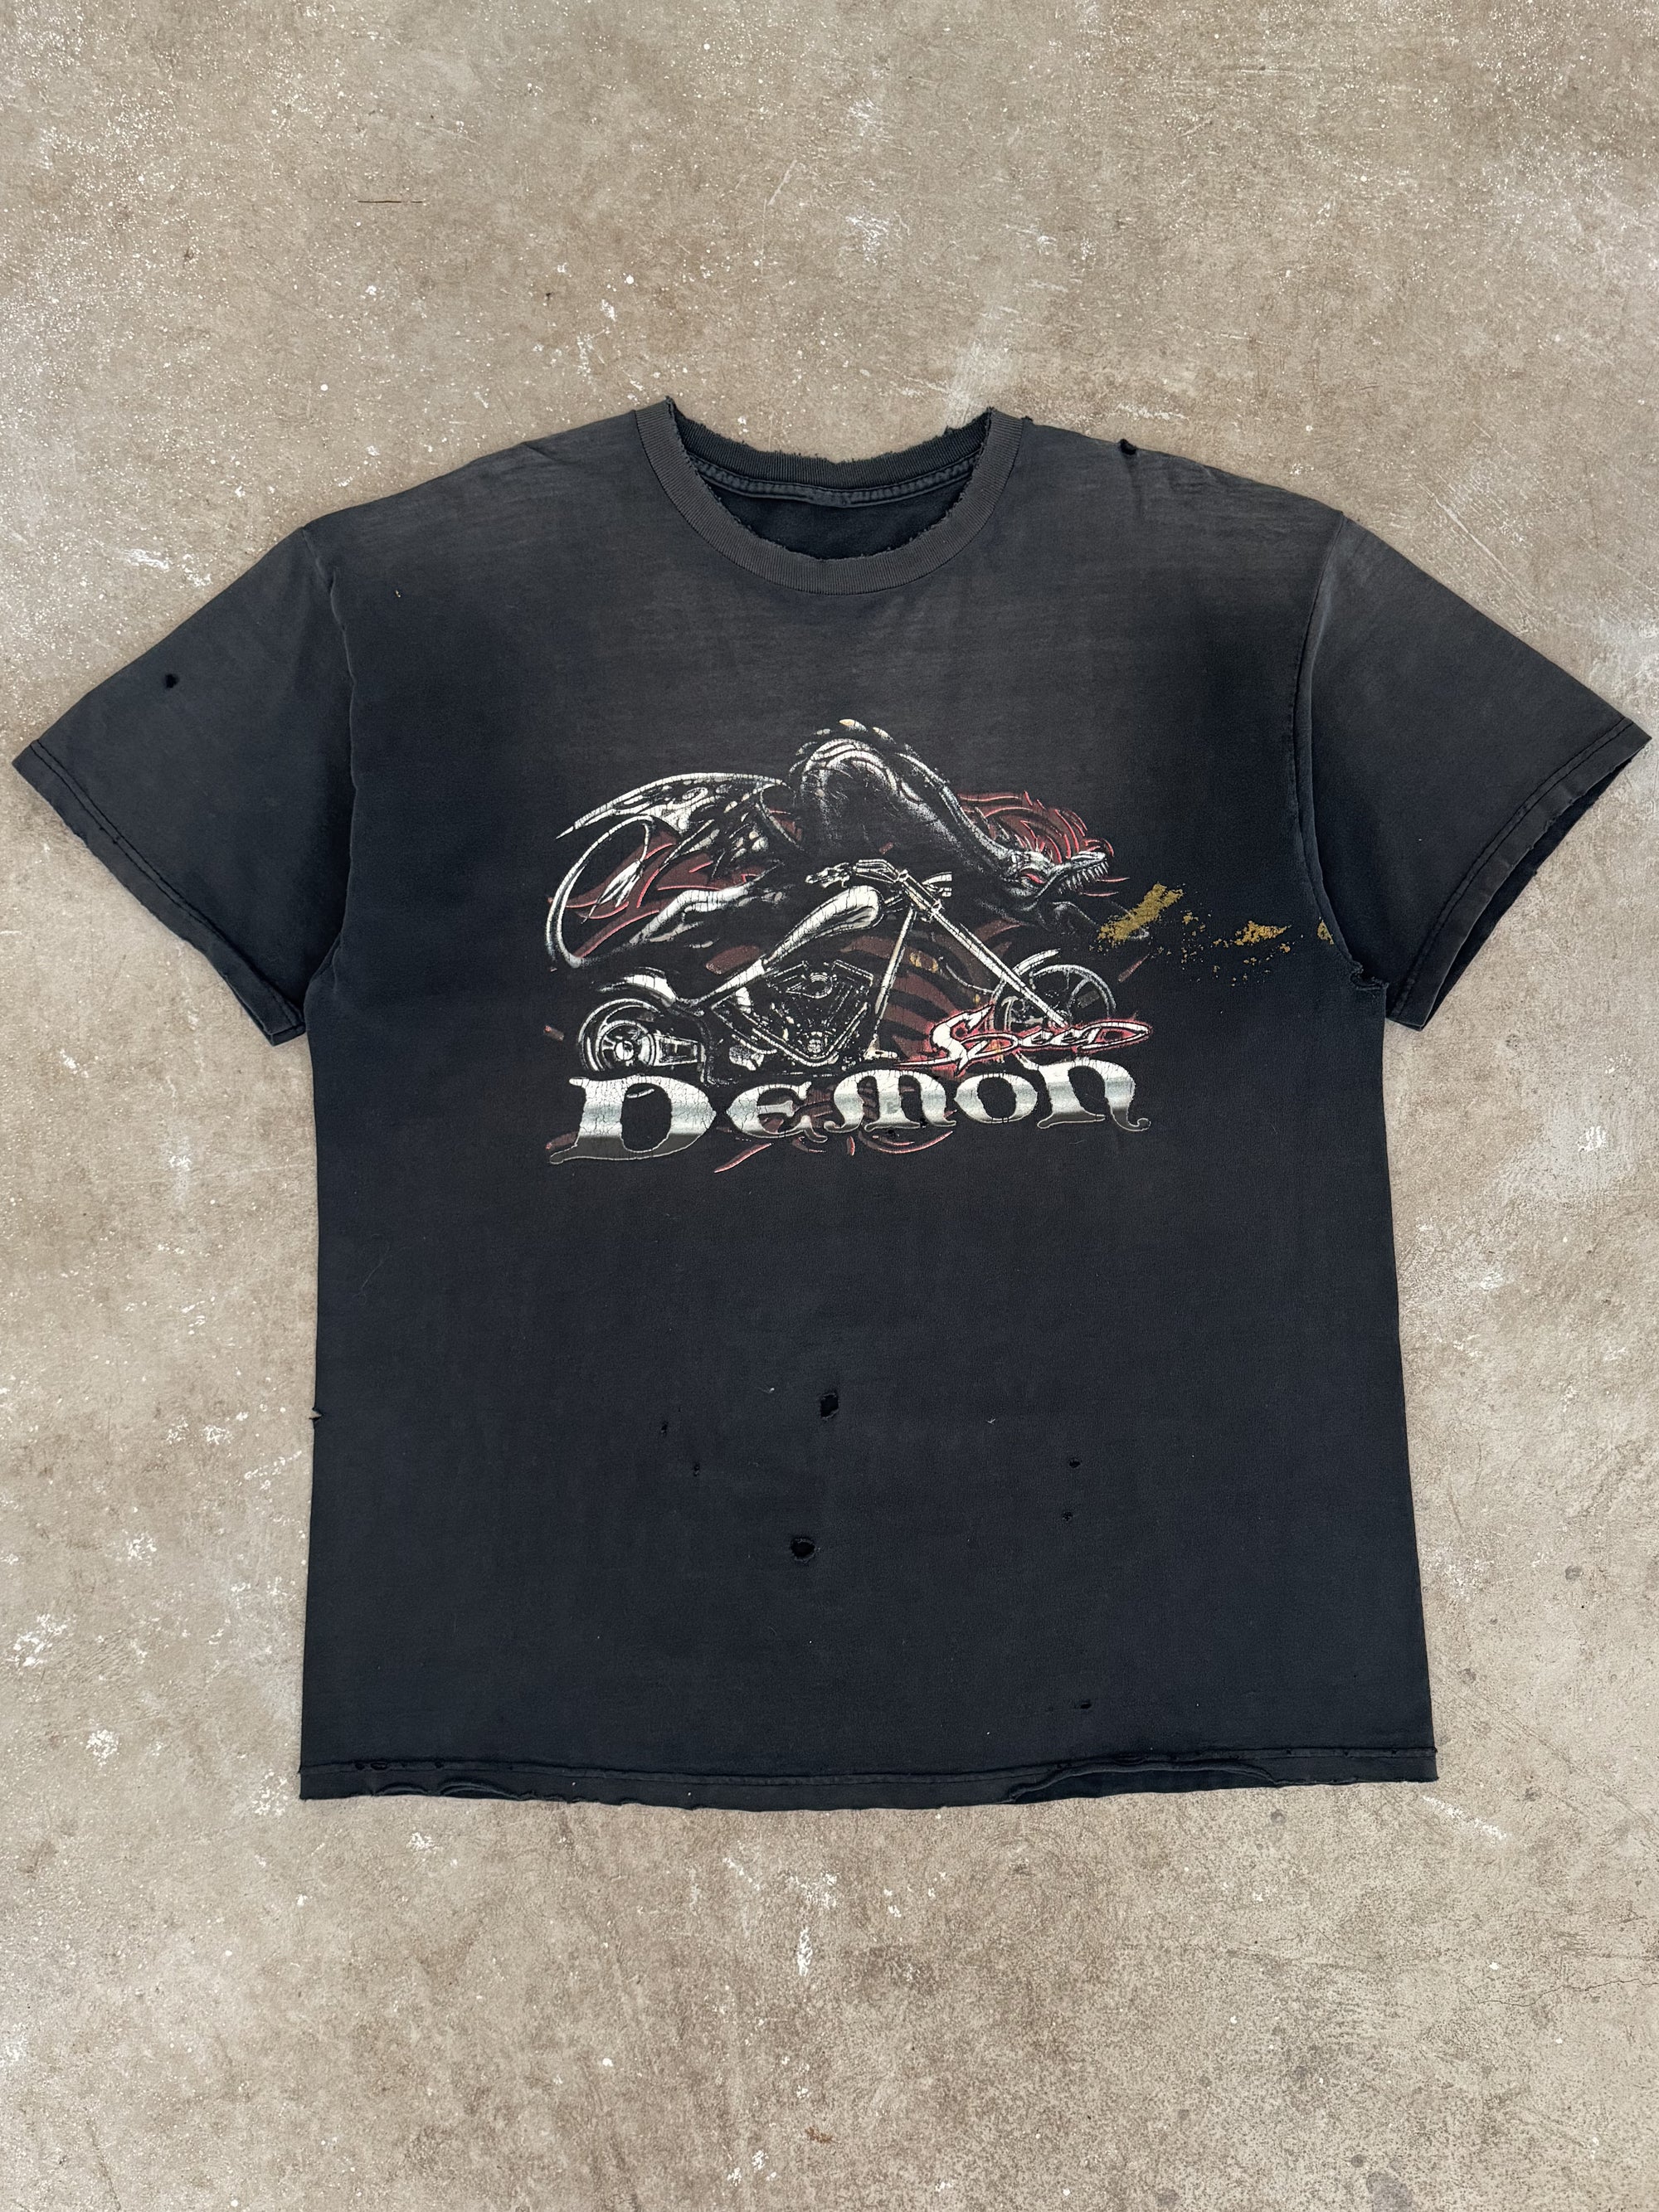 2000s "Speed Demon" Distressed Faded Tee (XL)